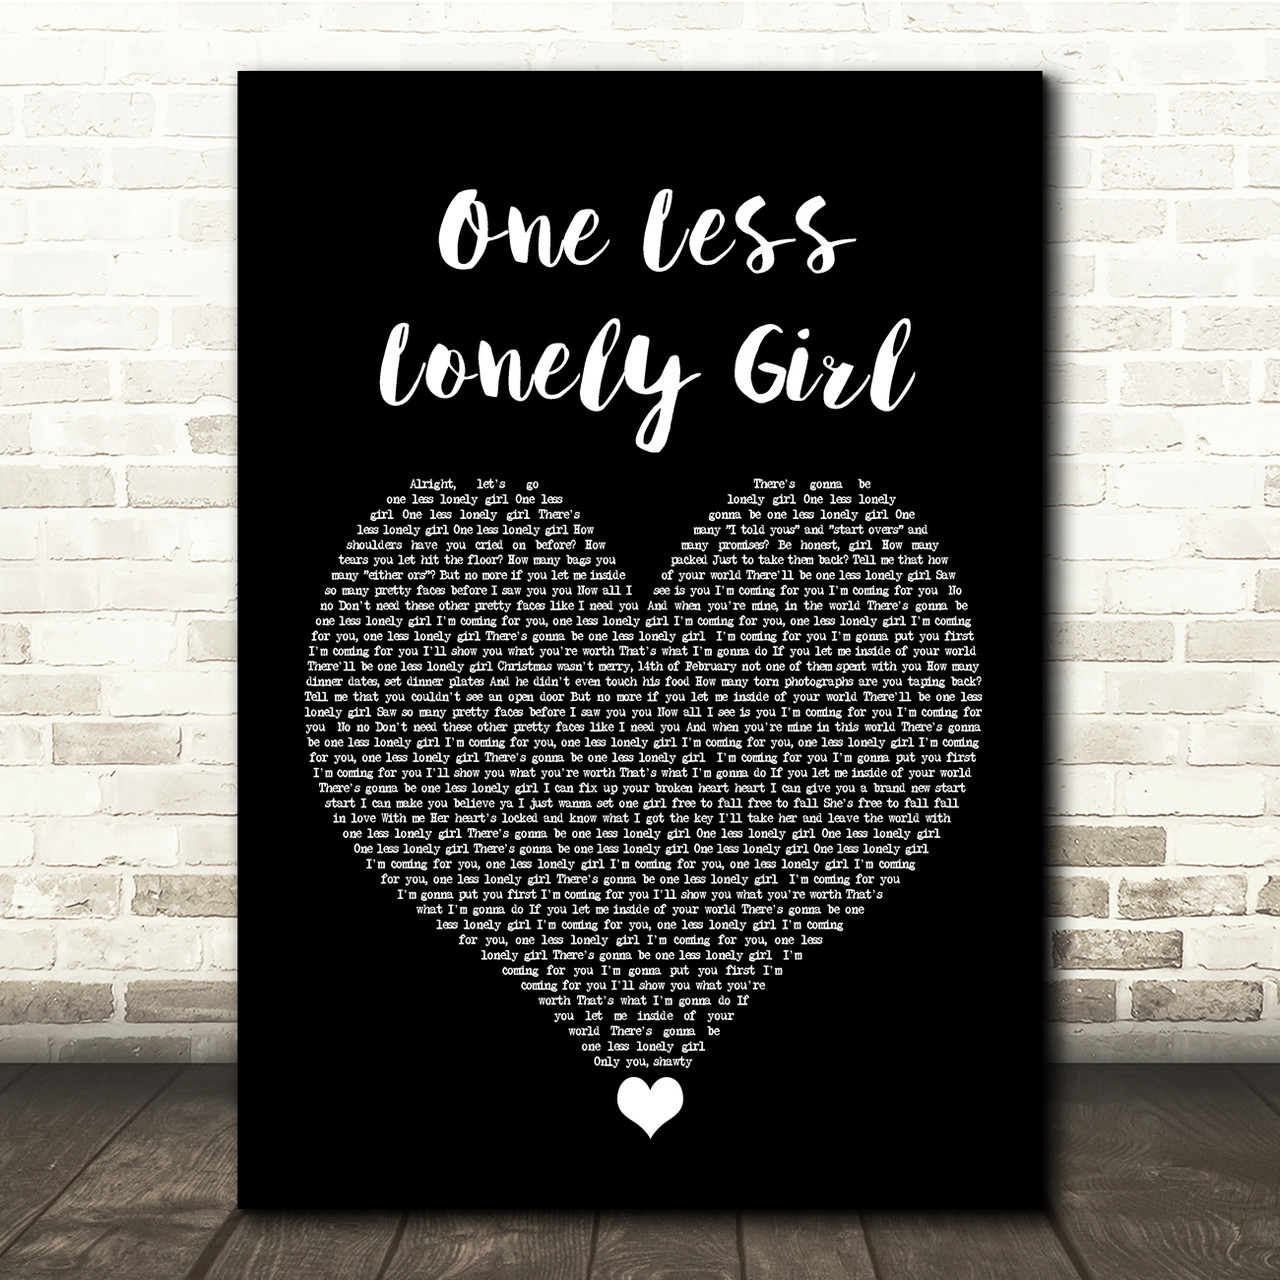 One less lonely girl-Justin Bieber with lyrics 